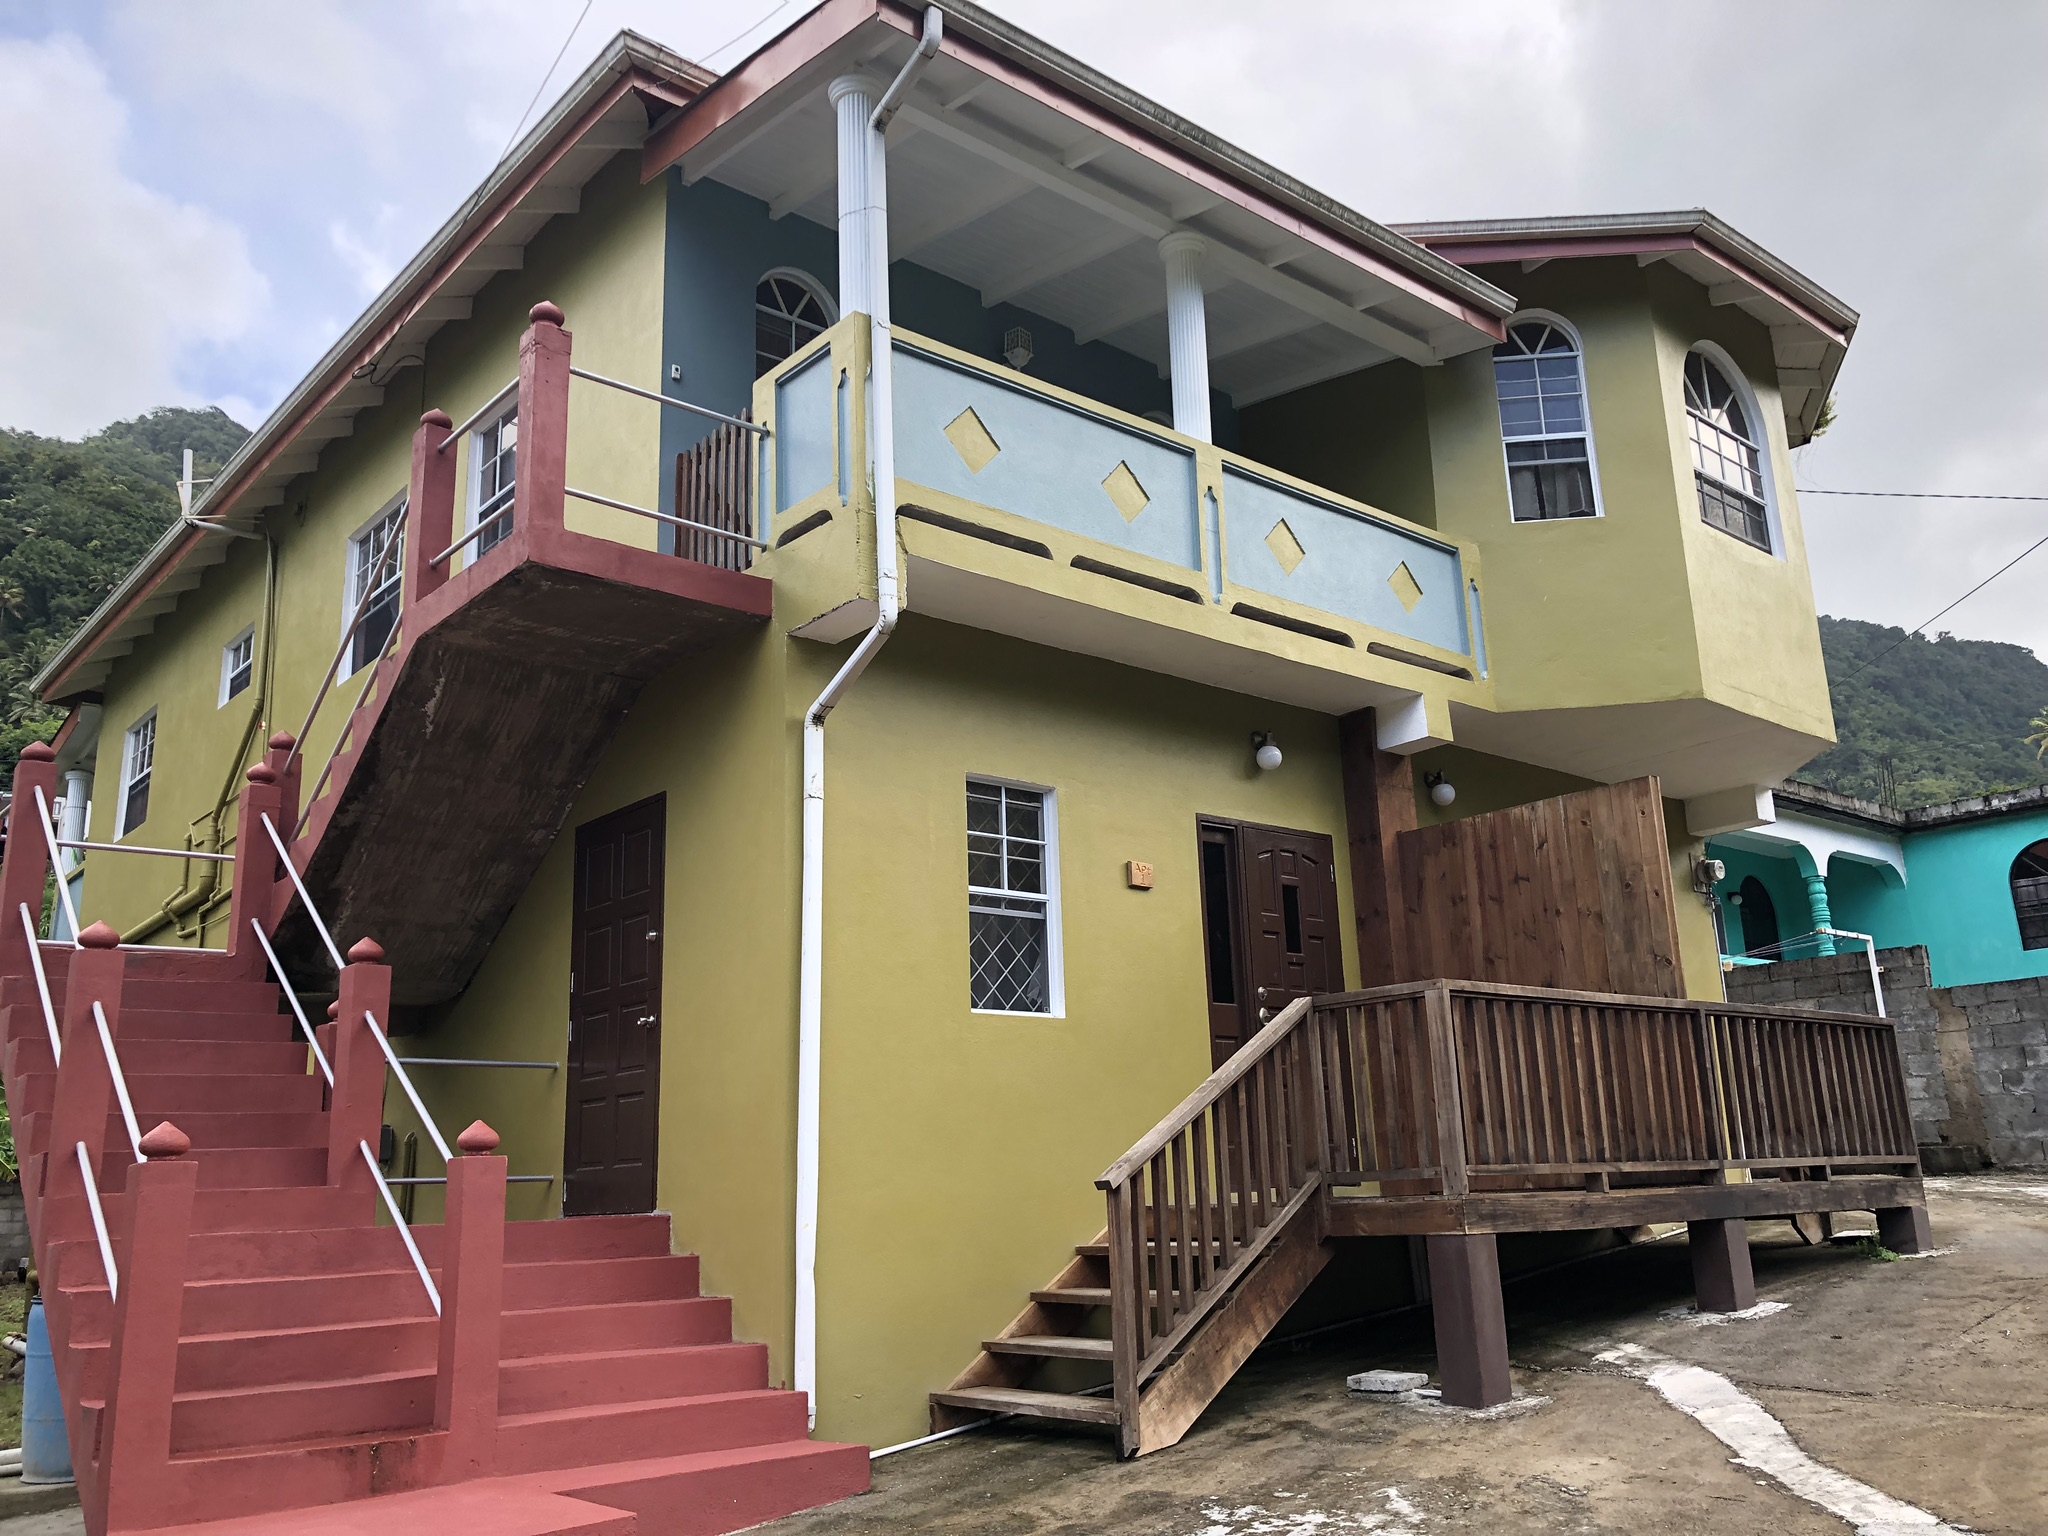 House For Sale in Soufriere St Lucia with 2 Apartments